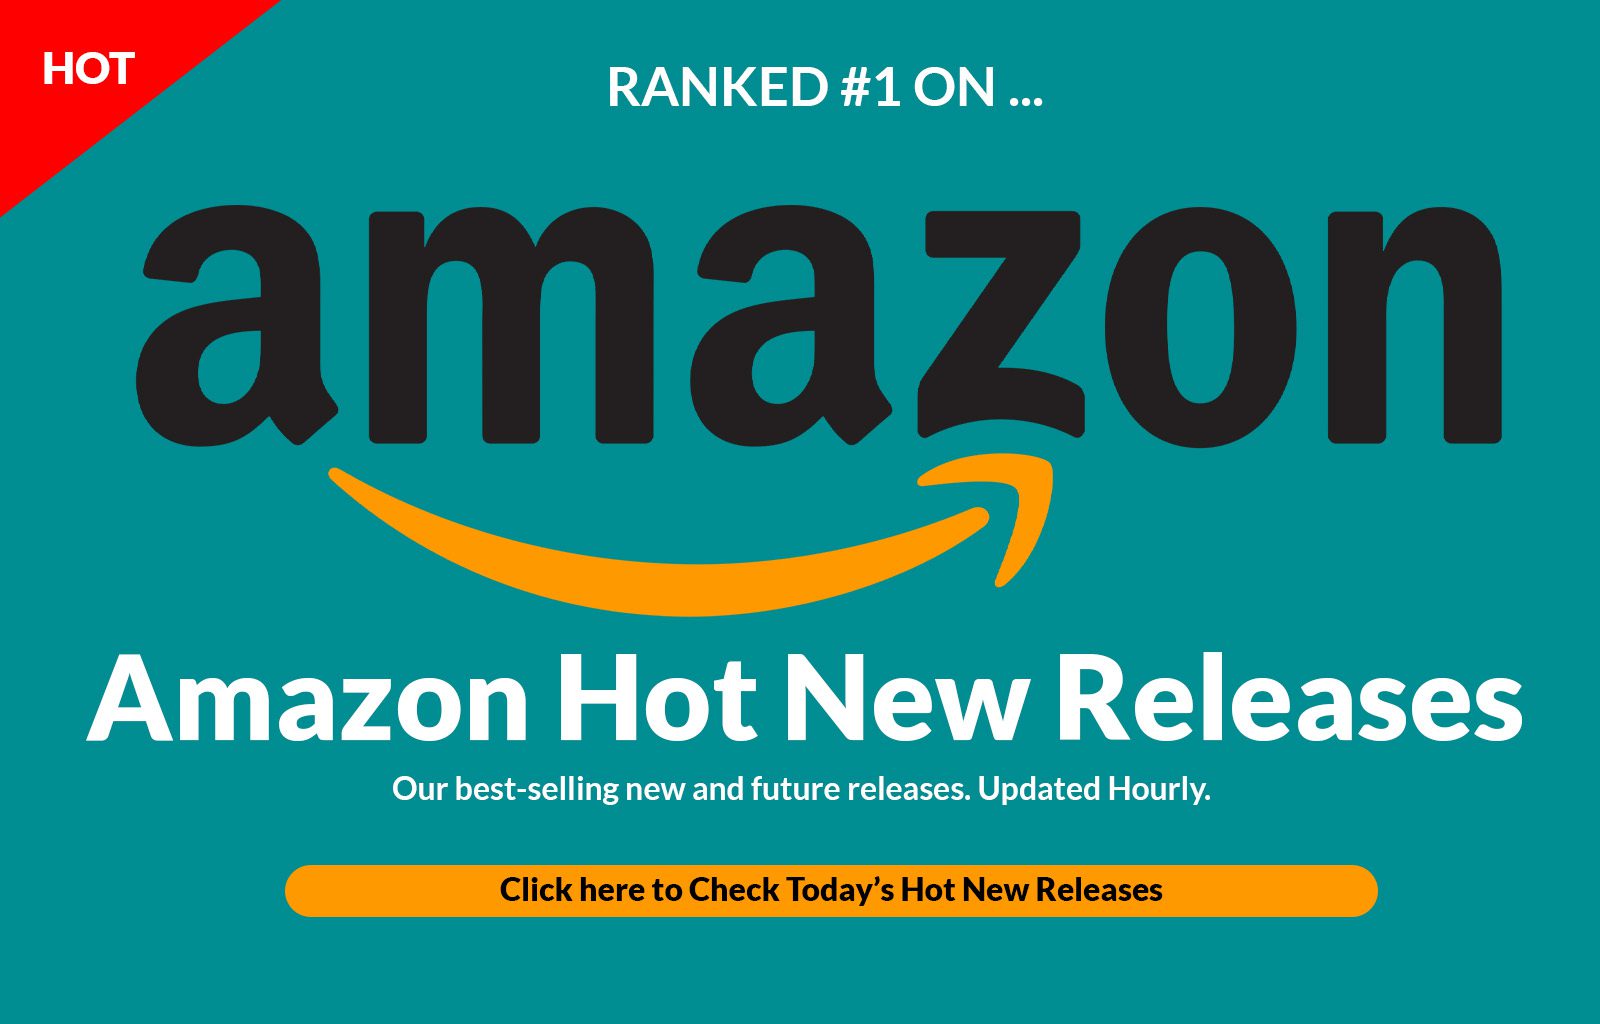 Amazon Hot New Releases Our bestselling new and future releases. Updated Hourly.